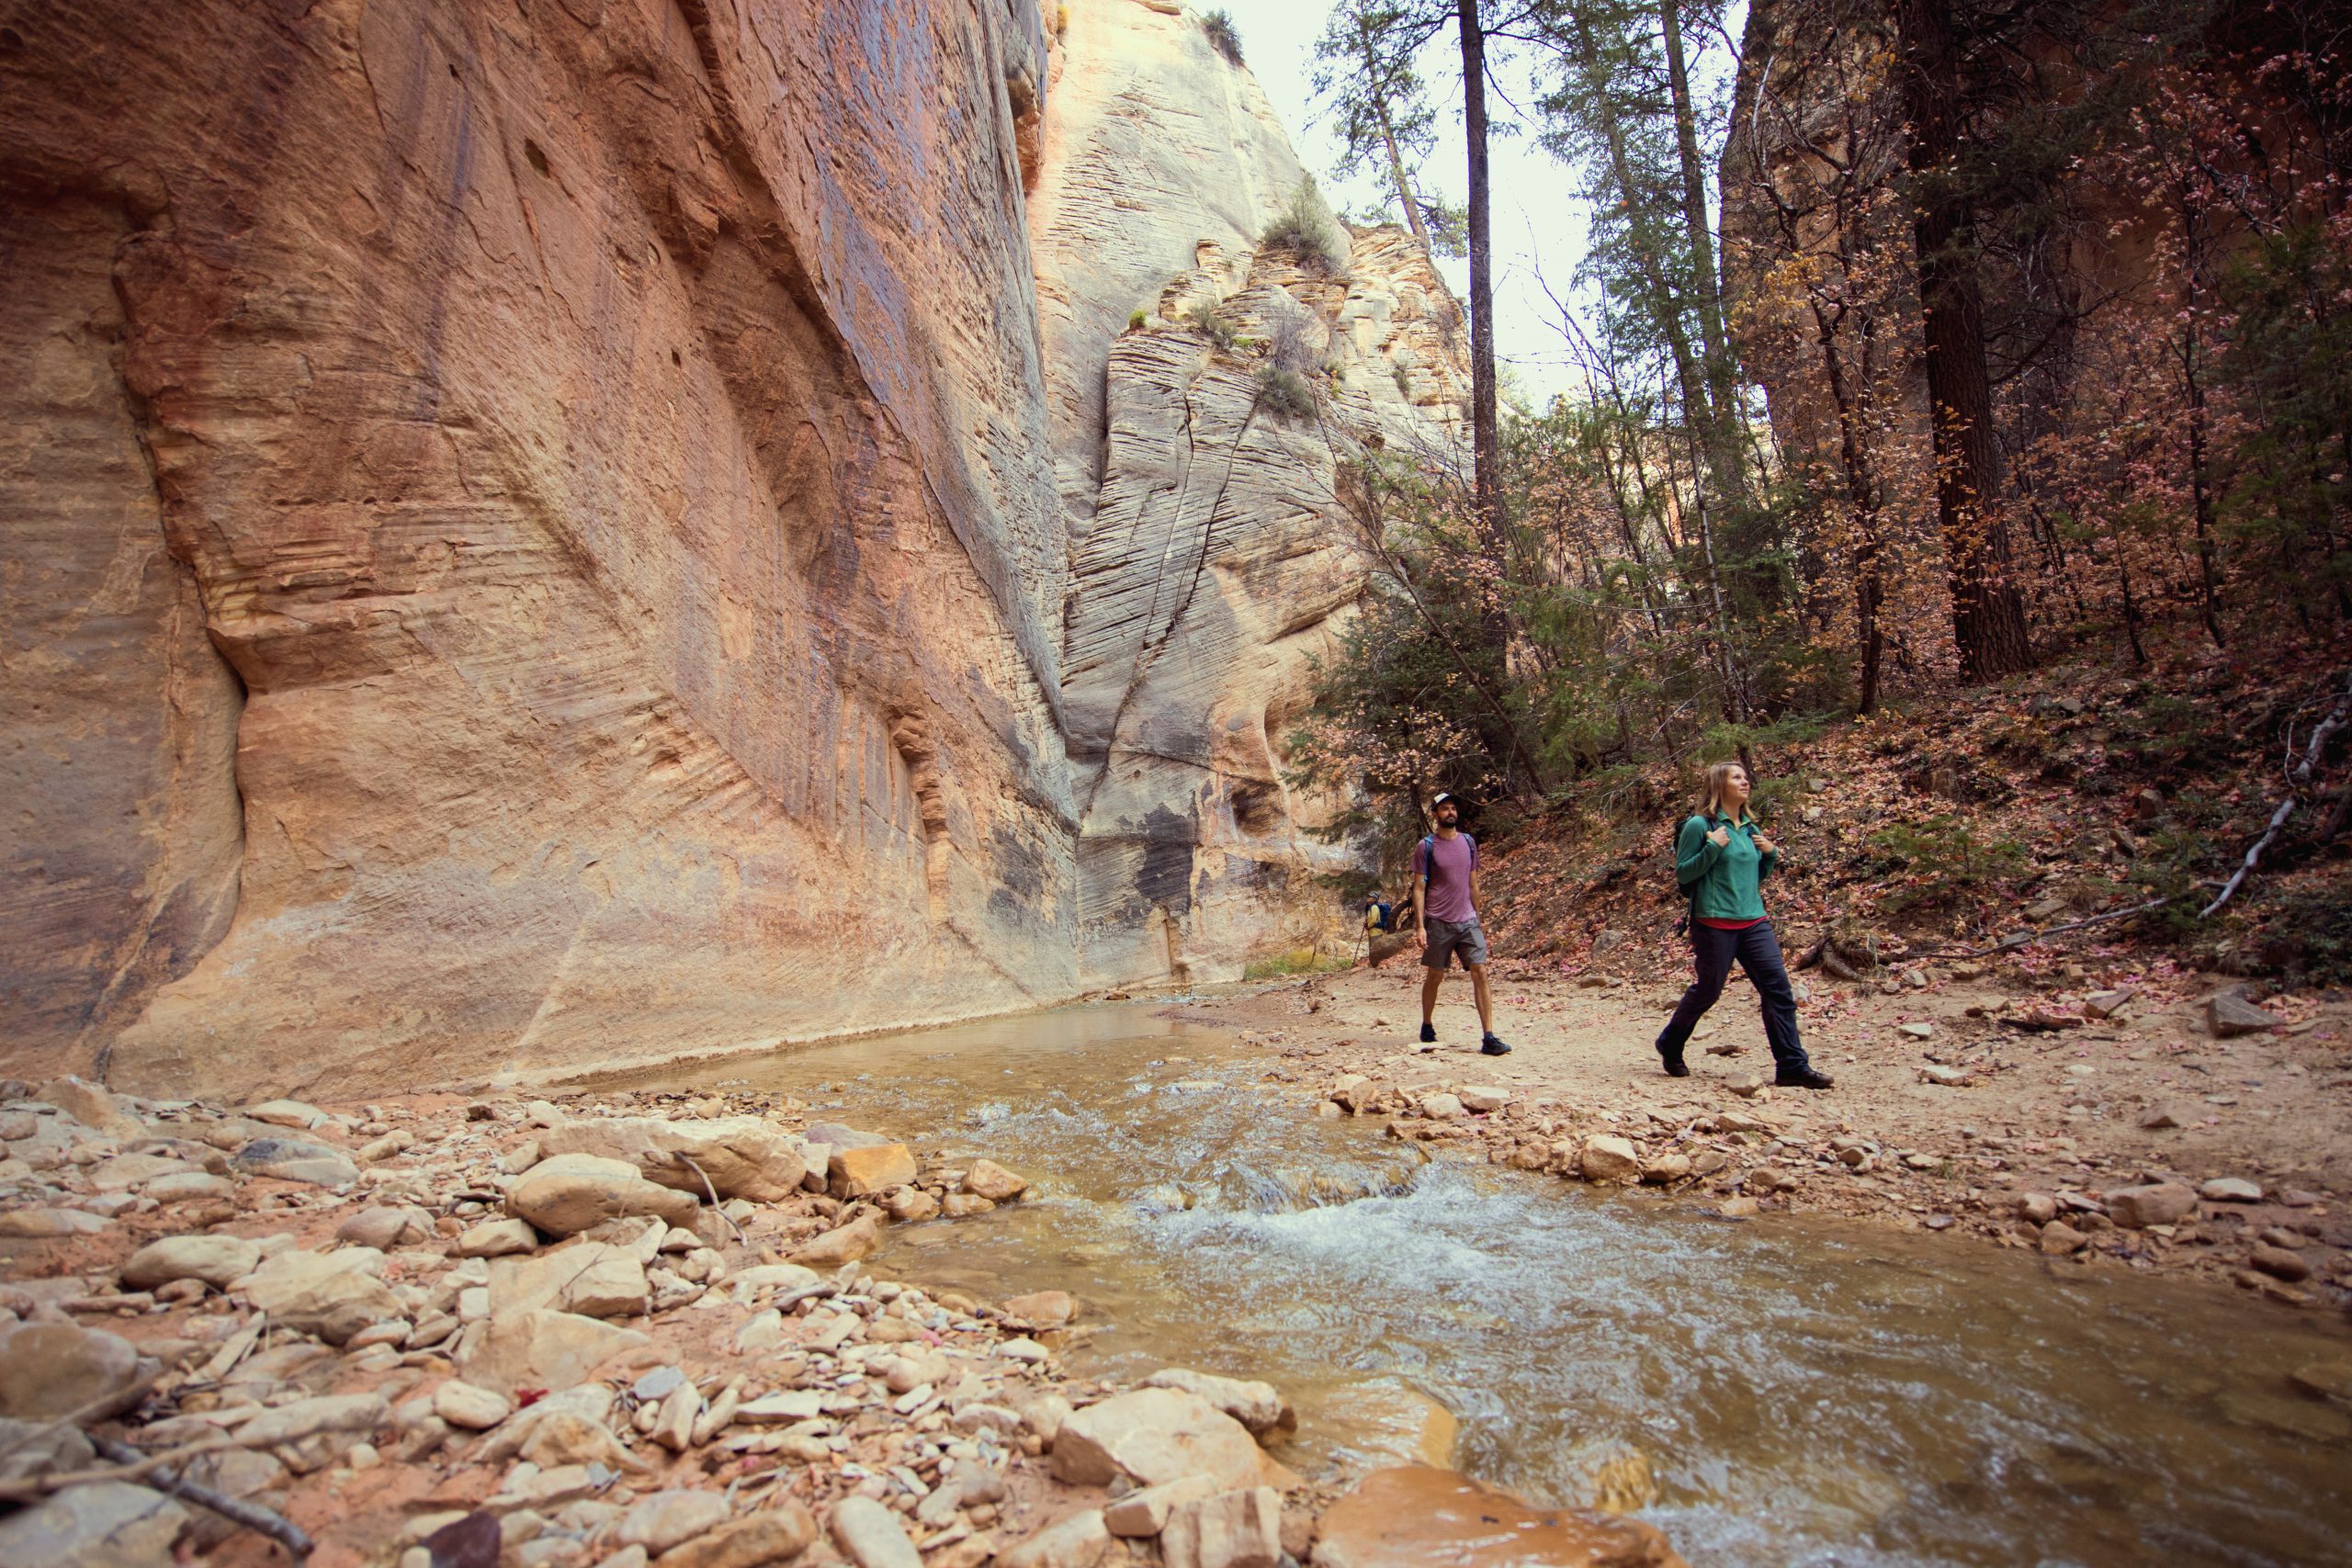 A man and a woman walk past the camera in a sandstone canyon